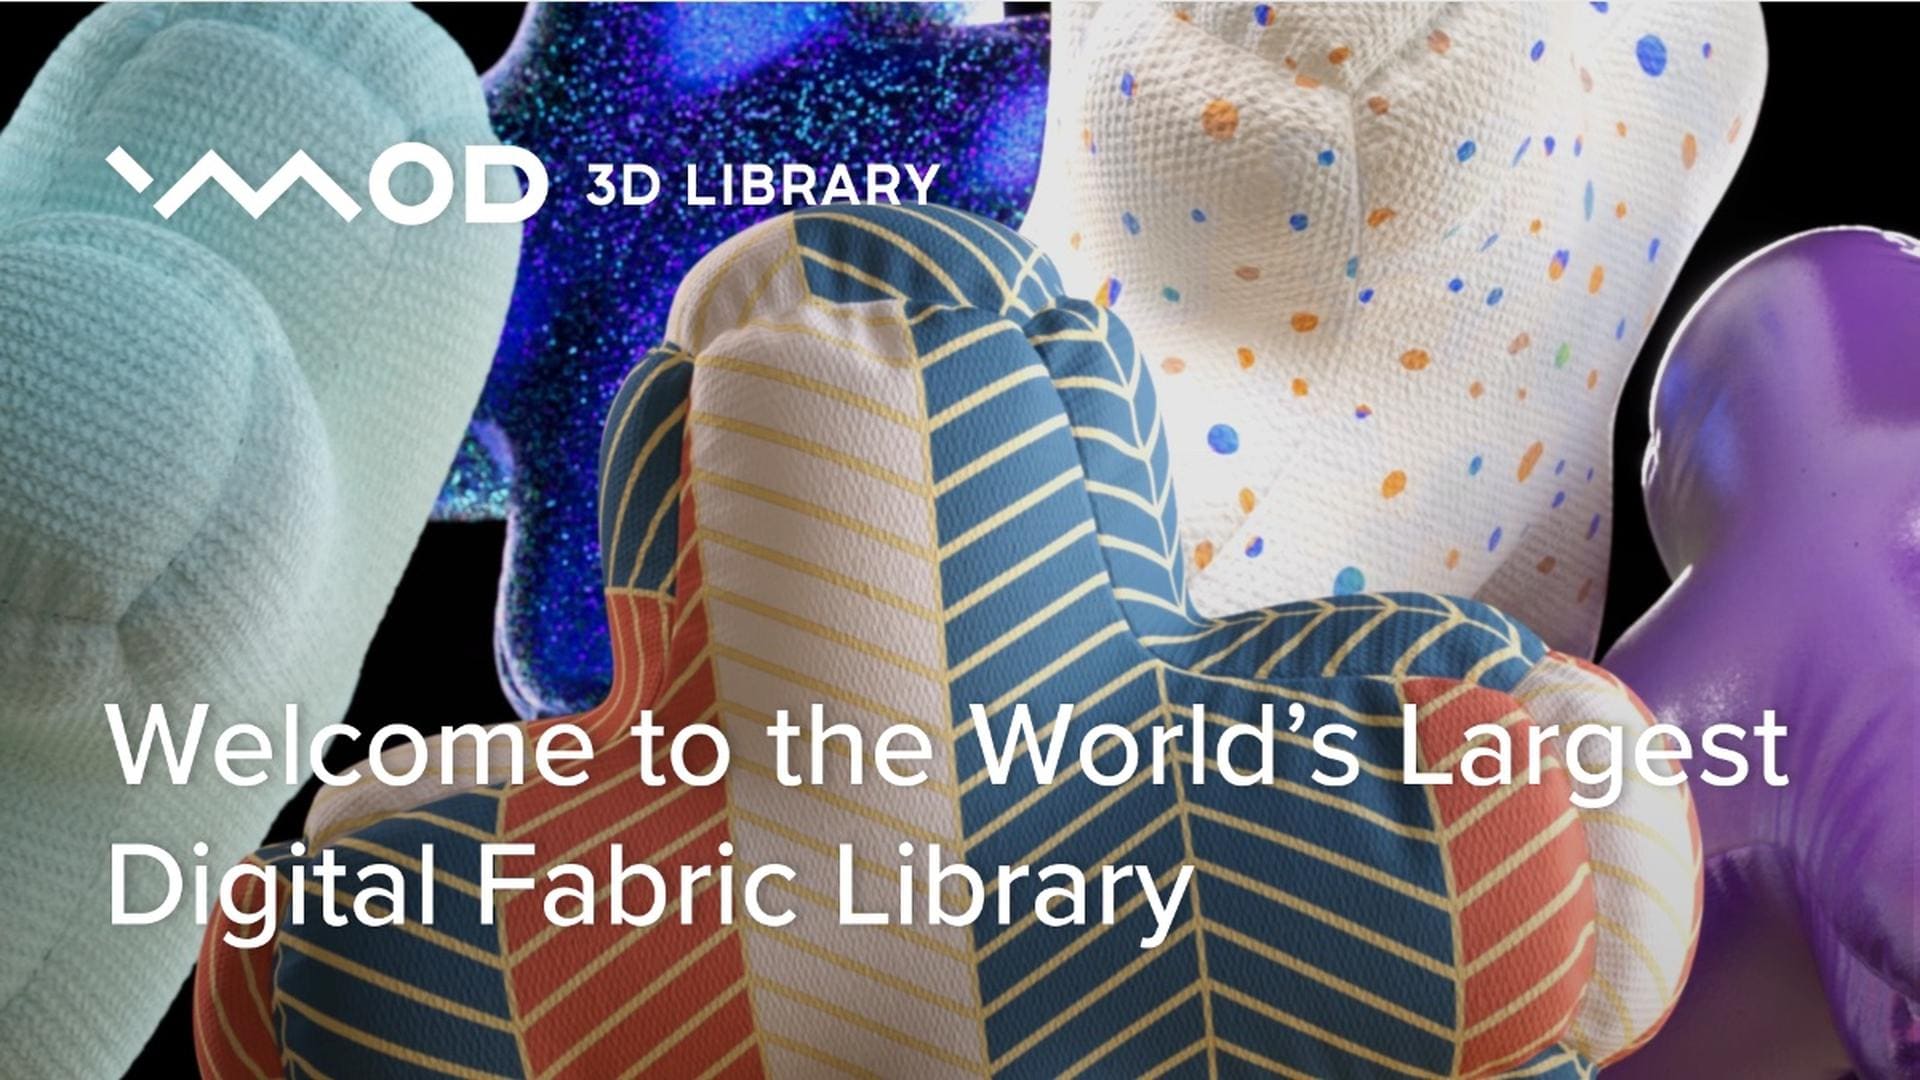 VMOD 3D Library